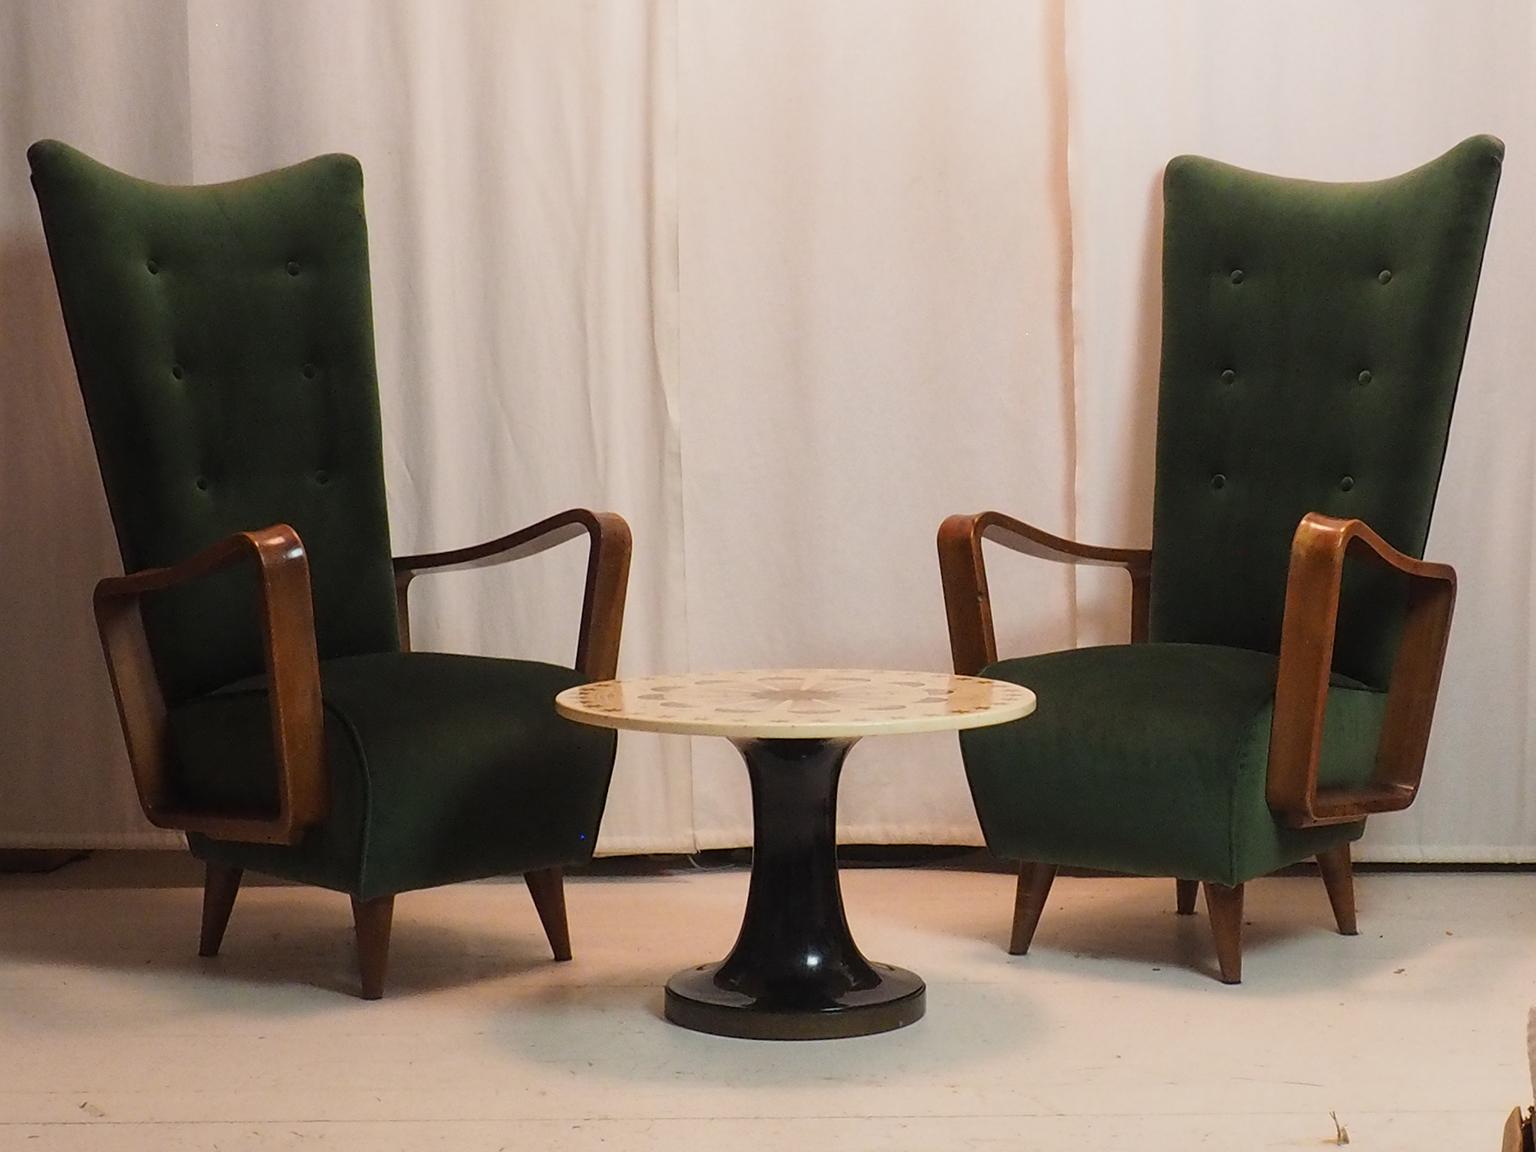 Midcentury High Back Italian Green Armchairs by Pietro Lingeri, Italy 1950s For Sale 2